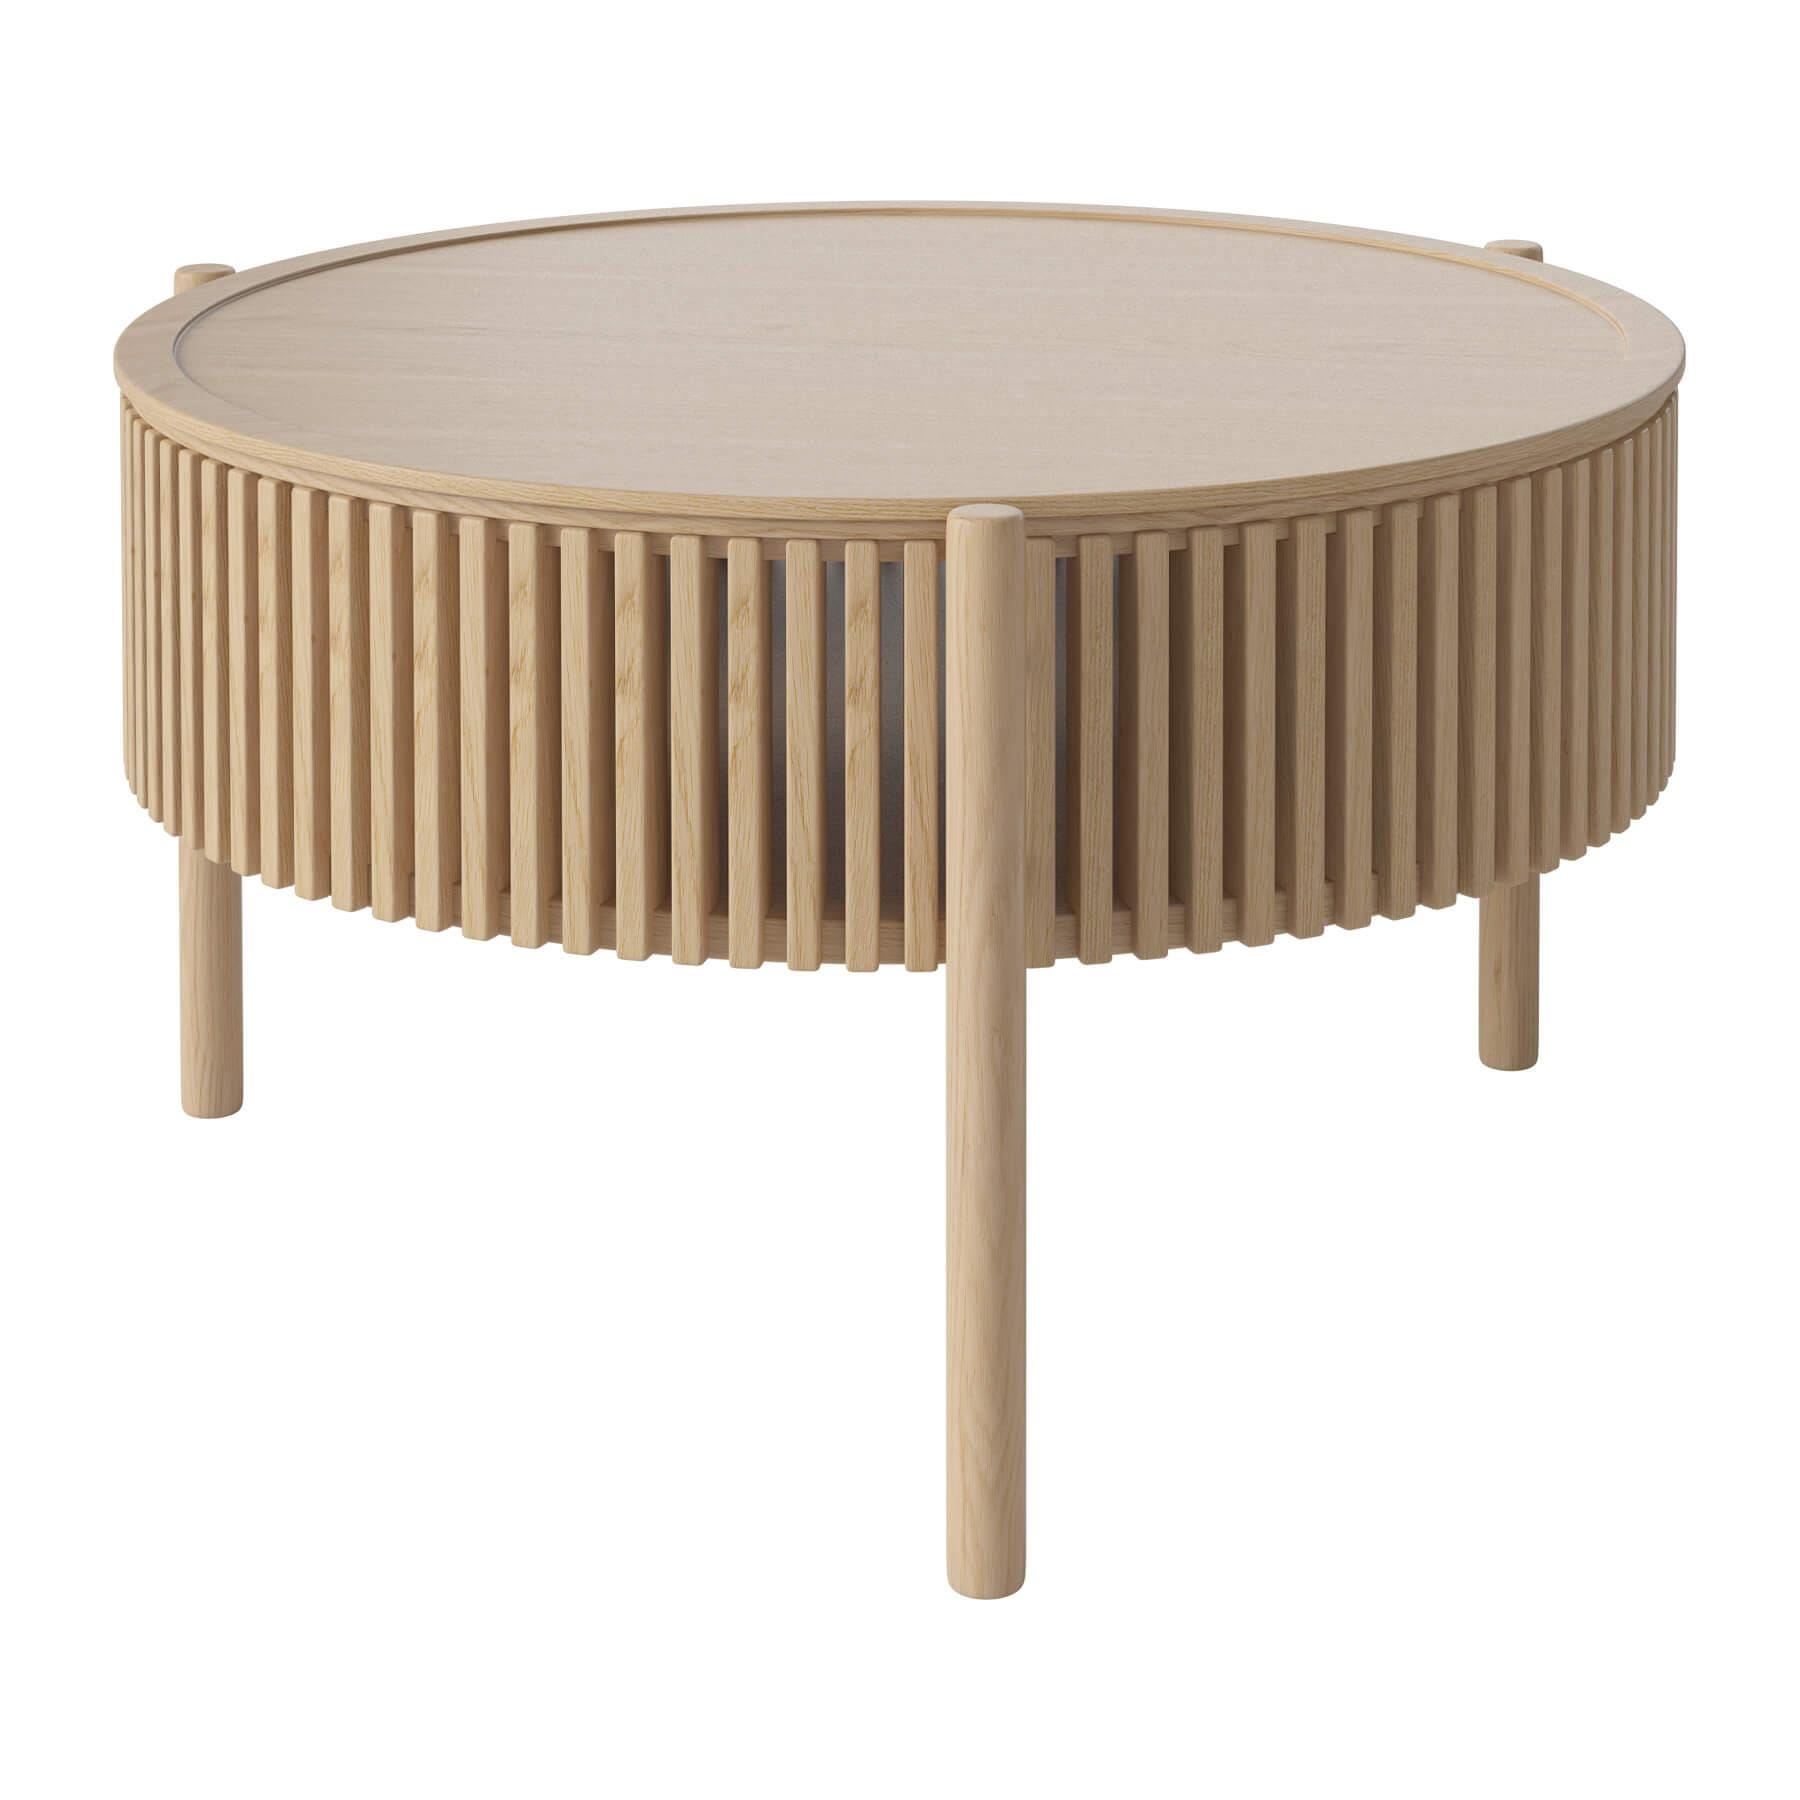 Bolia Story Coffee Table White Oiled Oak Light Wood Designer Furniture From Holloways Of Ludlow